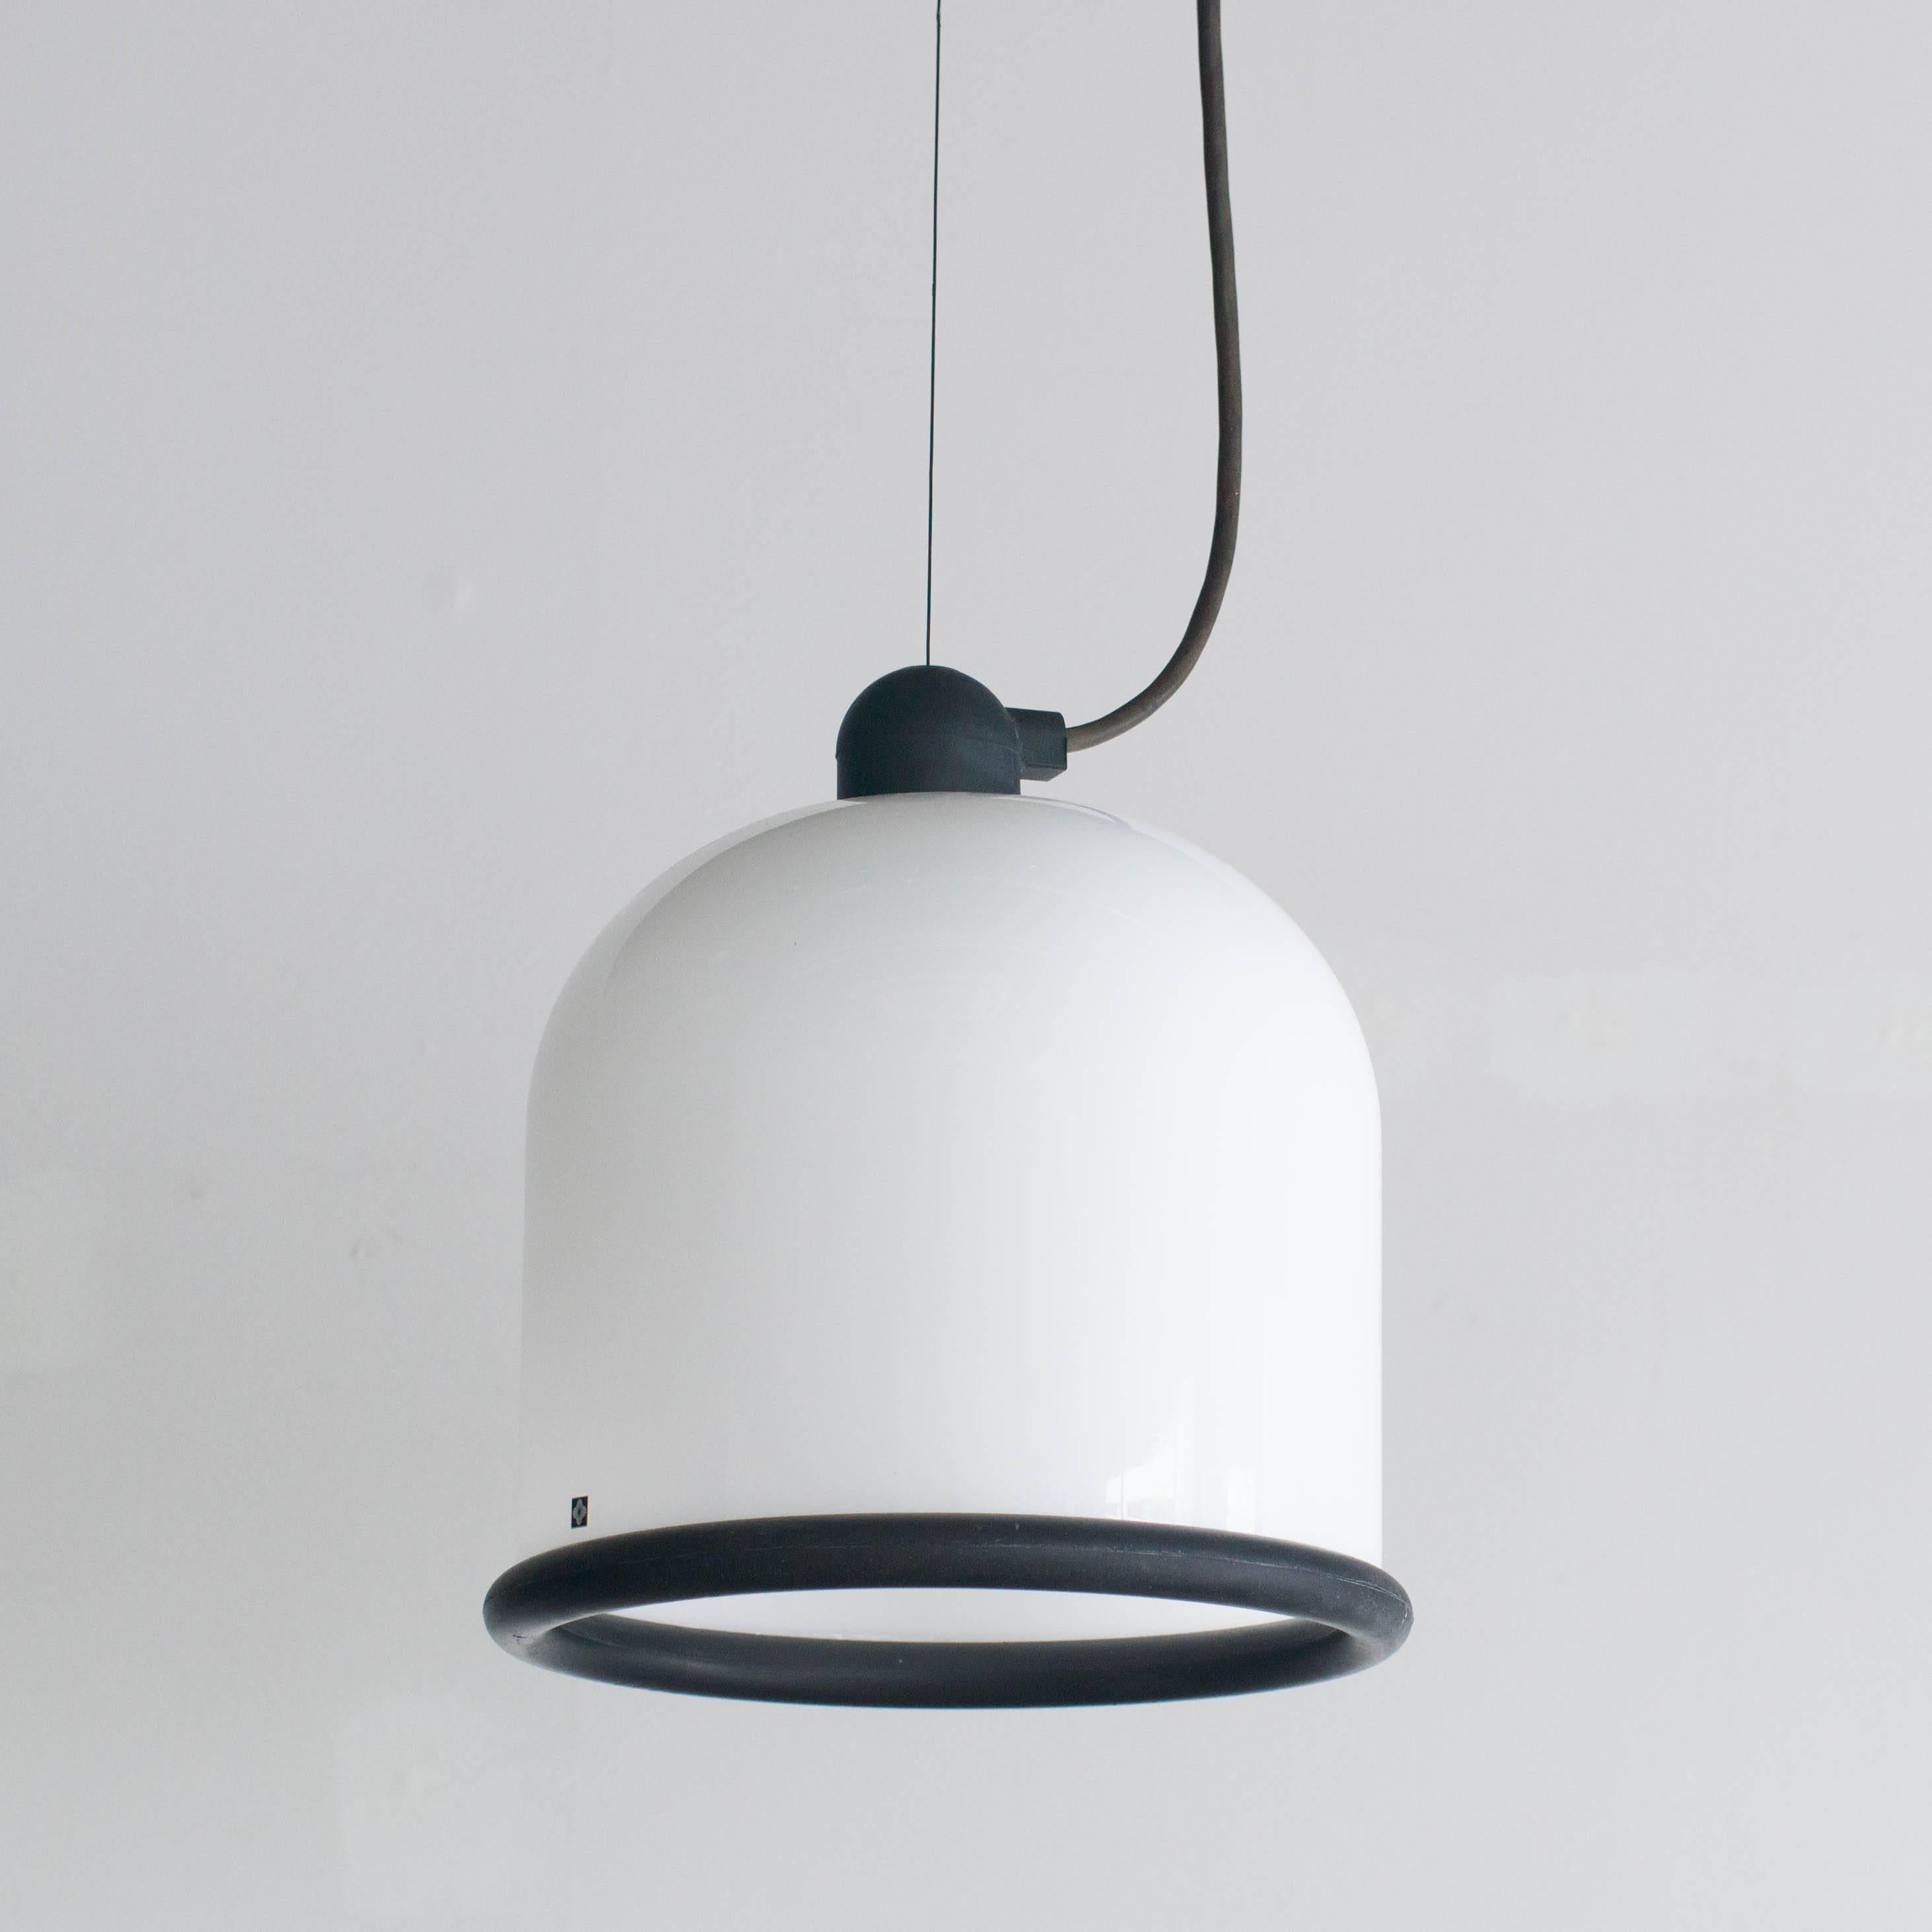 Domani pendant lamp designed by Masayuki Kurokawa for Yamagiwa. Made of glass with rubber lim. Half transparent glass shade in white.
This is large model. Also, We have small model in stock.